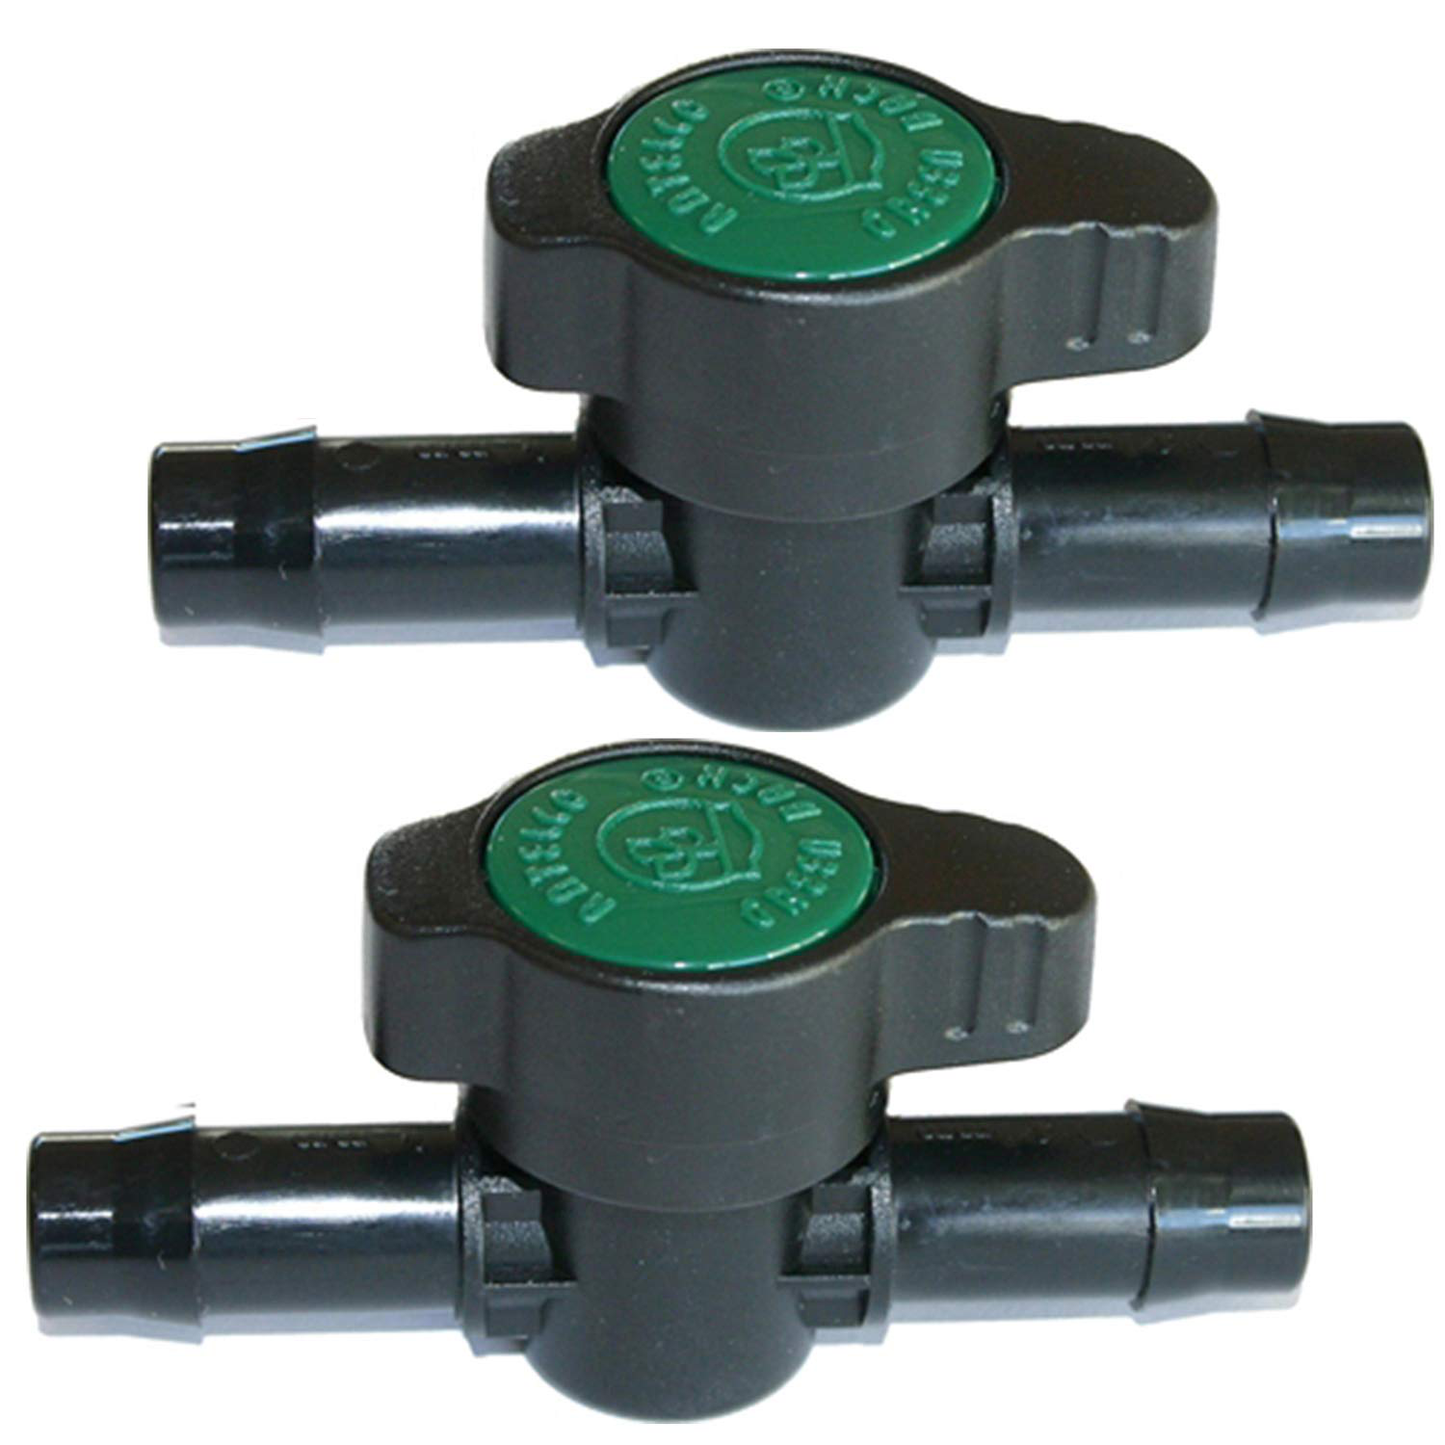 Habitech 2-Pack In-Line Barbed Ball Valve 13Mm for 1/2 Inch Tubing .520 ID - Regulate and Shut-Off/On Water Flow